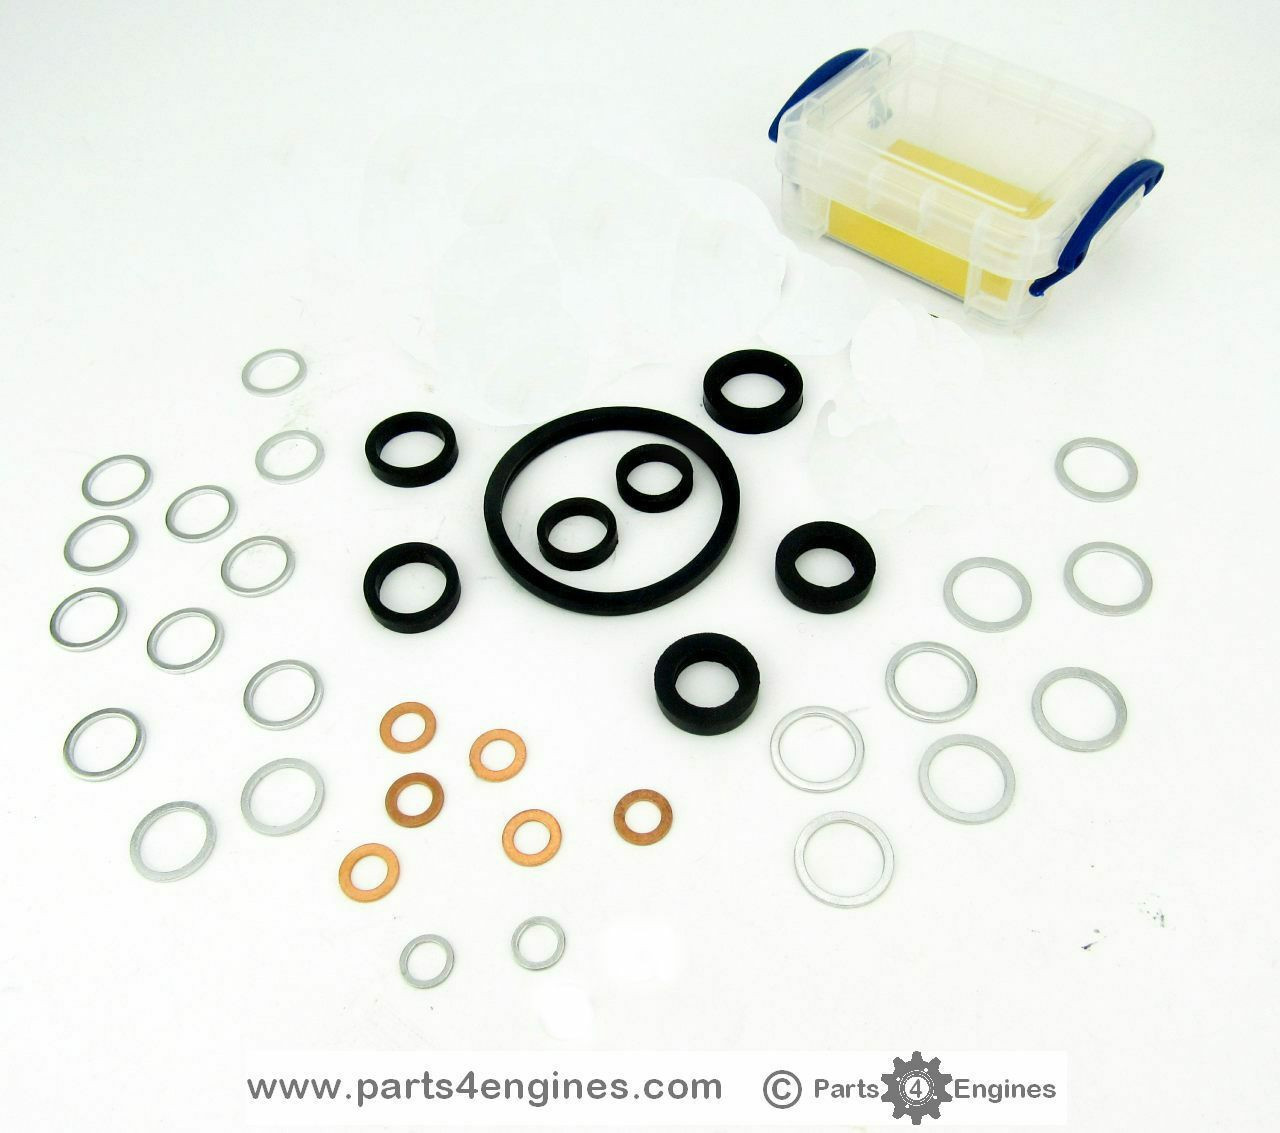 Volvo Penta 2003 water pipe seal & fuel washer kit from Parts4Engines.com